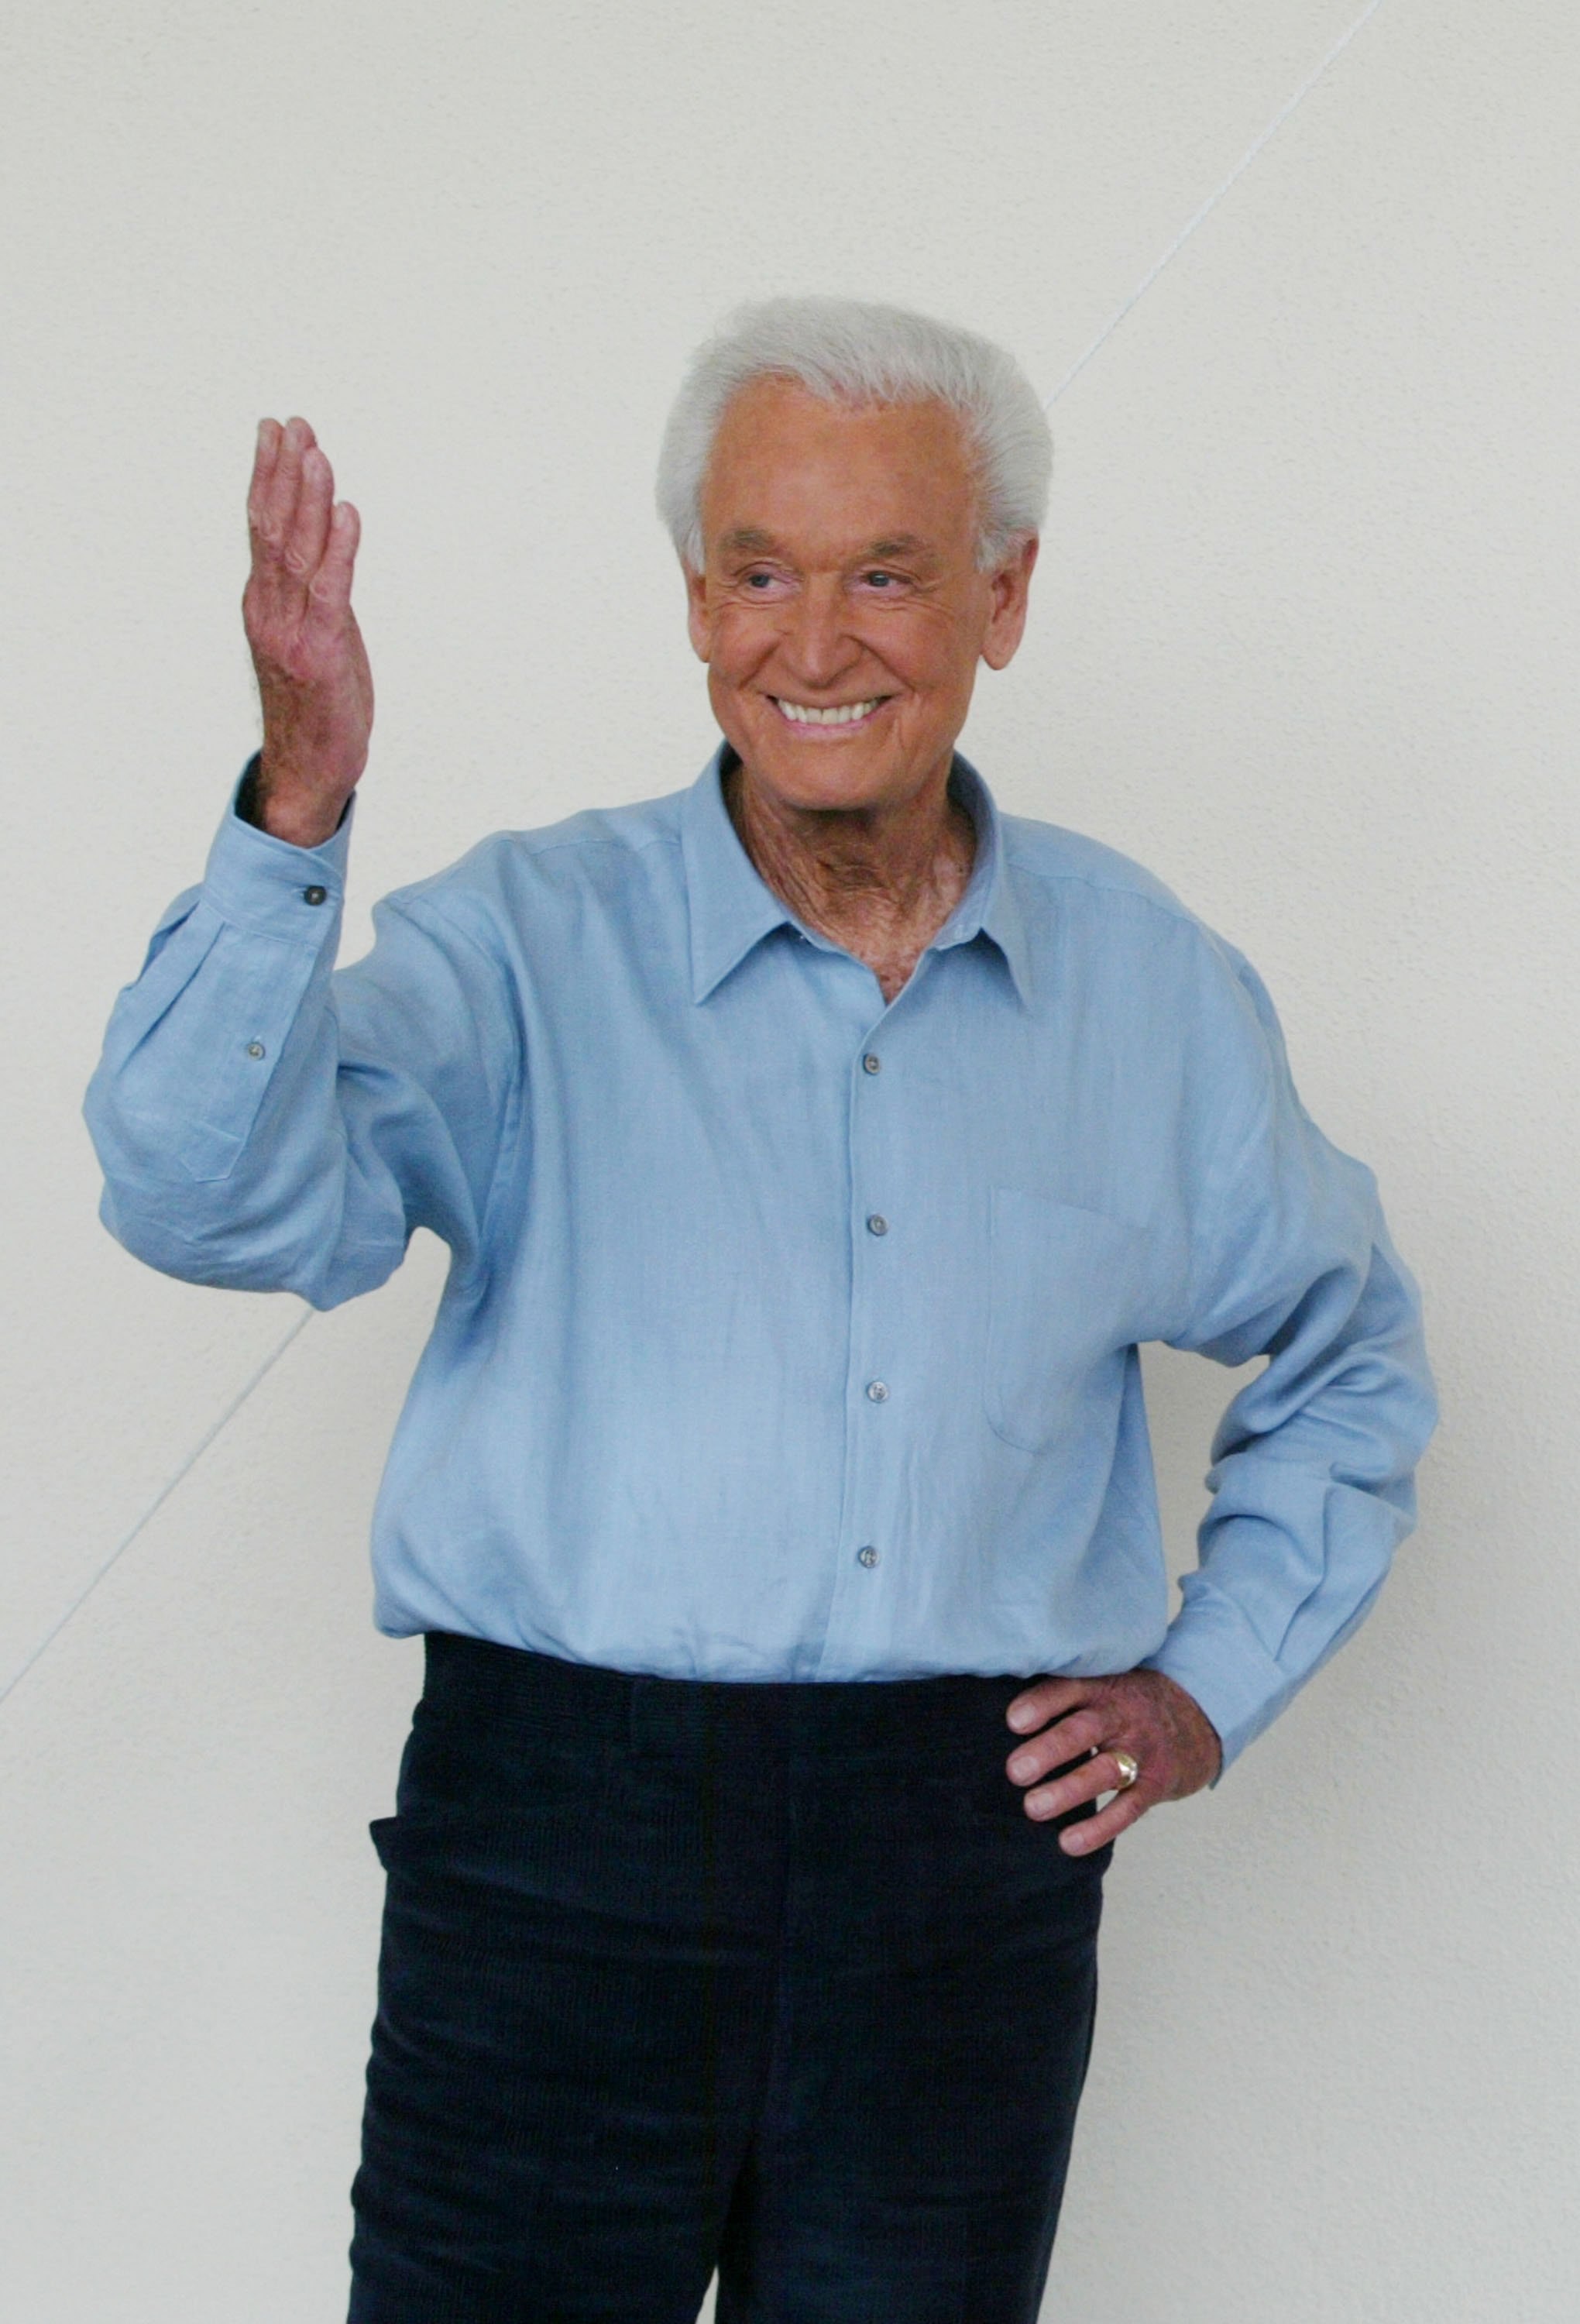 TV game show host Bob Barker reacts to a crowd greeting him as he arrives for the unveiling of a mural in his honor at CBS Television City on June 12, 2003, in Los Angeles, California | Source: Getty Images